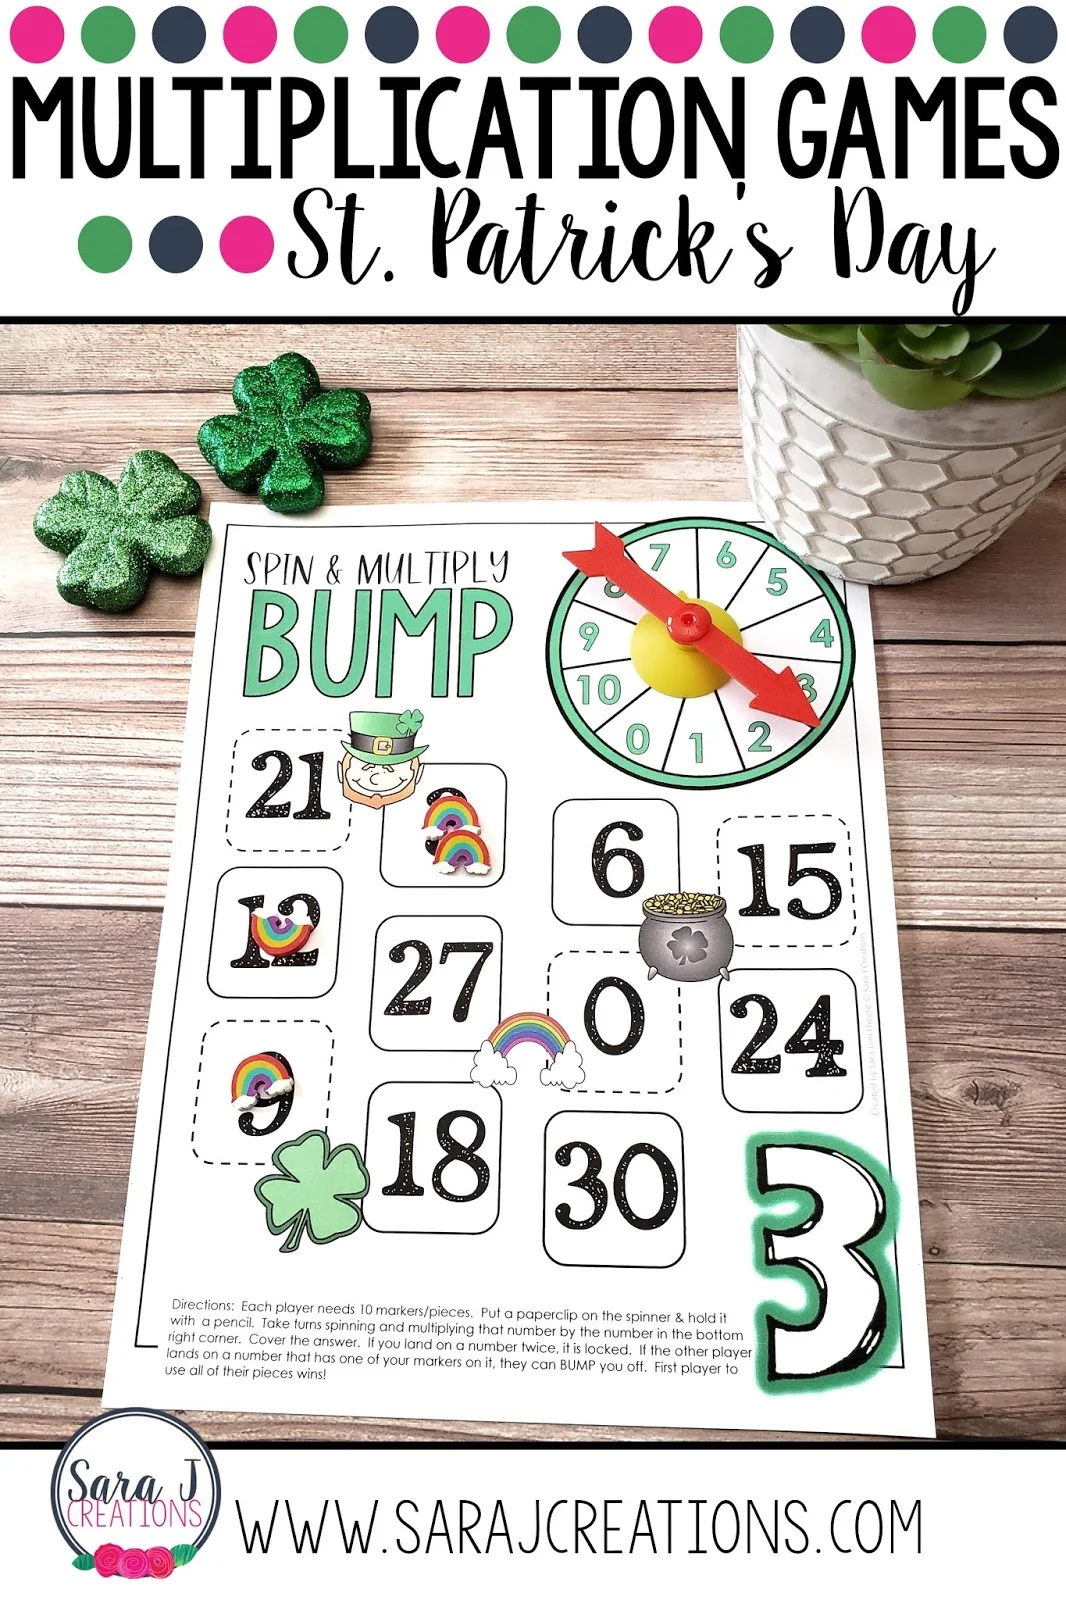 Practice multiplication facts with these fun math games for kids. Perfect for second, third, or fourth grade as students work on fact fluency.